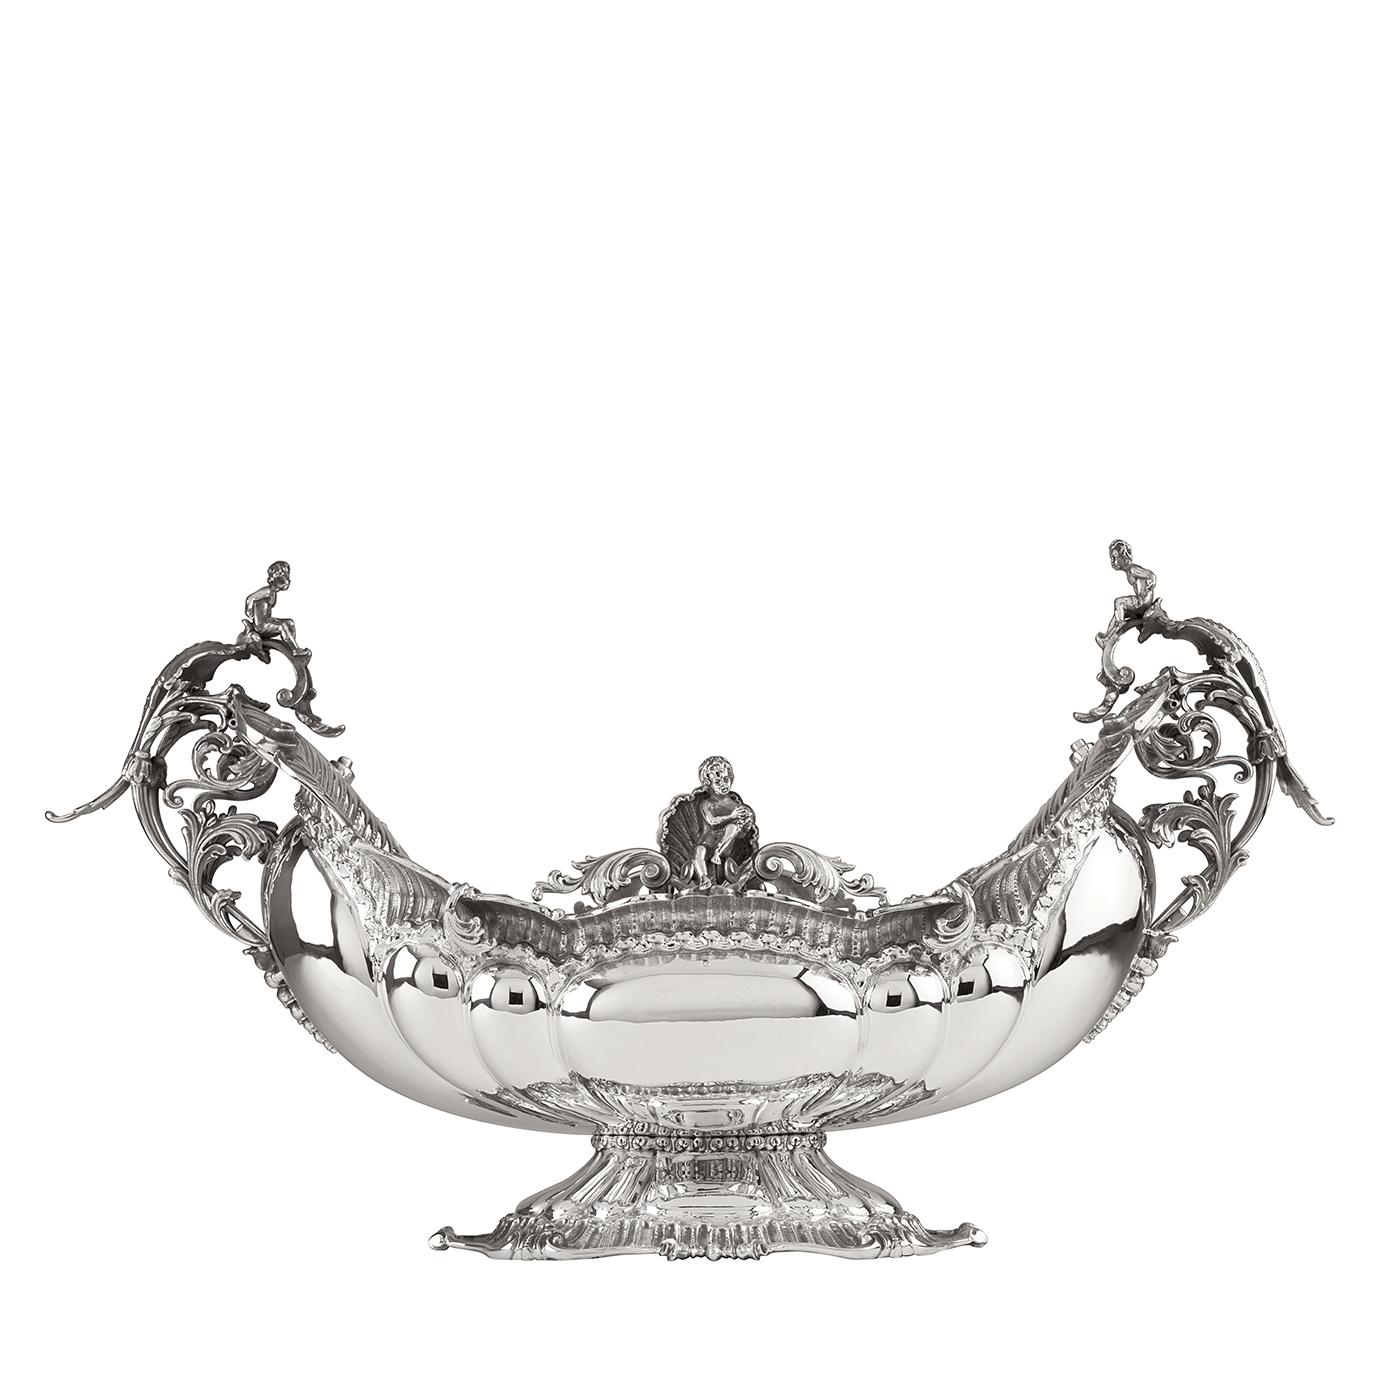 This splendid silver centrepiece has the unique and magnificent shape of a trophy, whose symmetrical shape is sinuous and luxurious. Its surface is smooth and is adorned throughout the base and at the top edge of the cup with an elaborate decoration